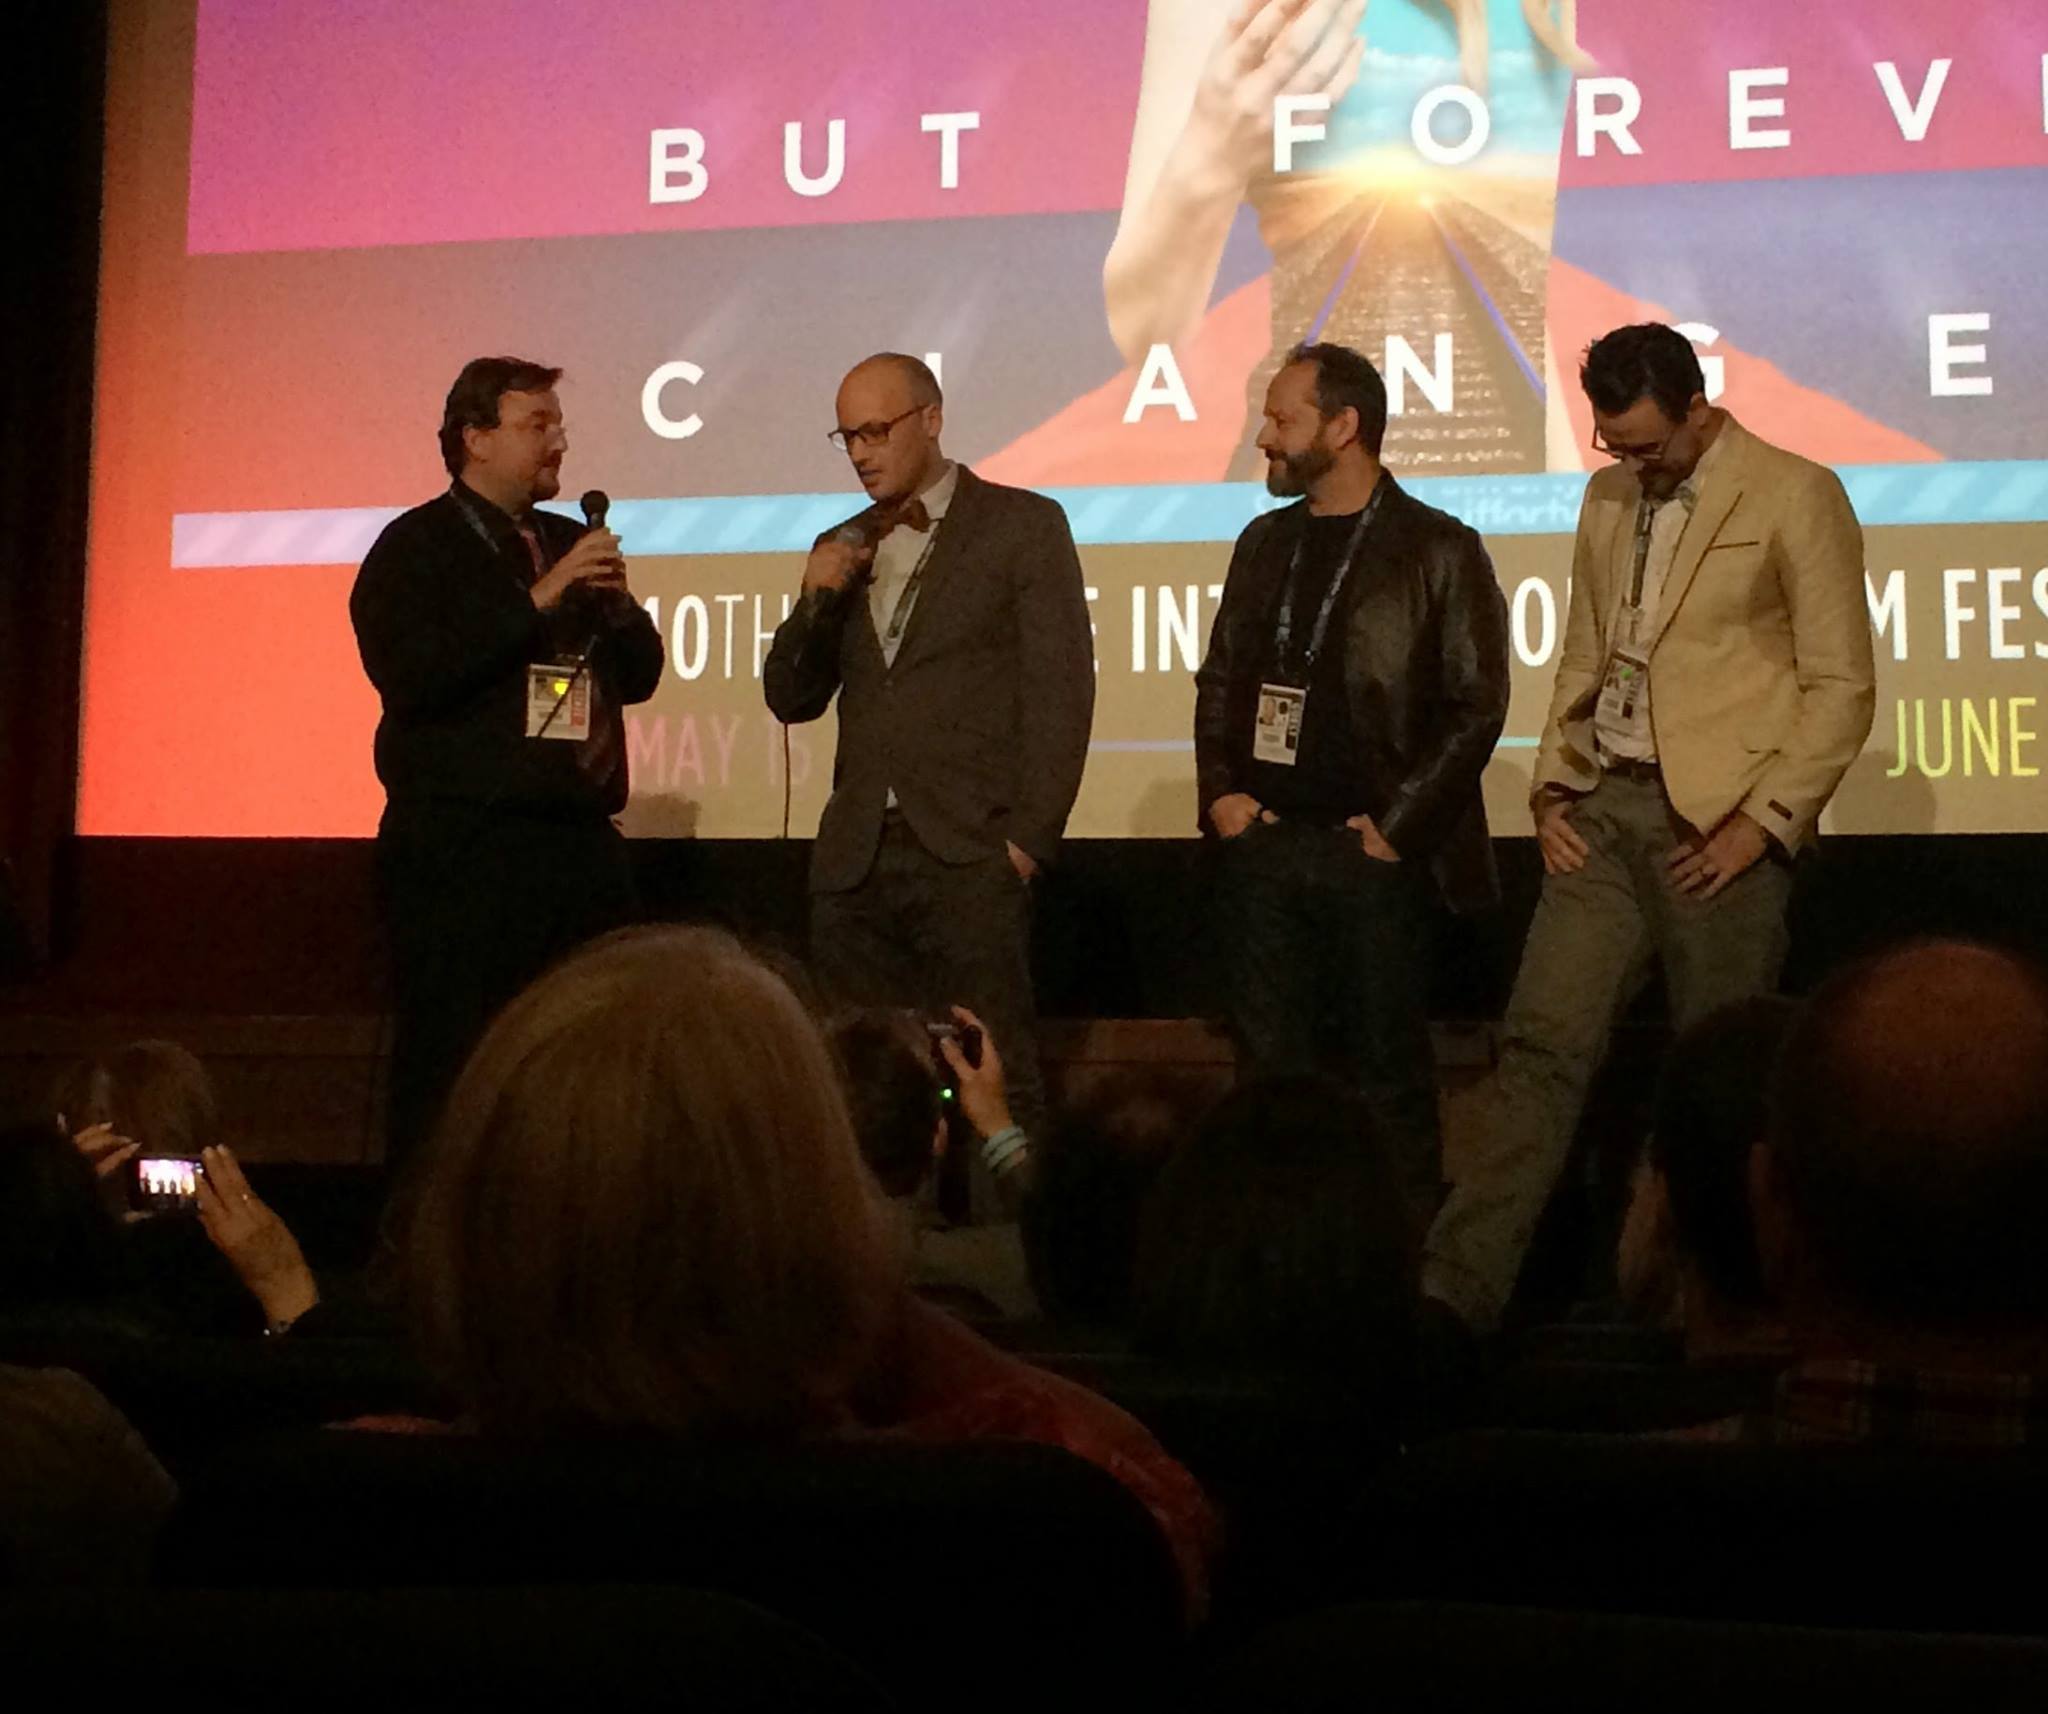 Leading Lady Premier at the Seattle Film Festival with Gil Bellows, Dustin Kasper, Llewelynn Greeff and Henk Pretorius